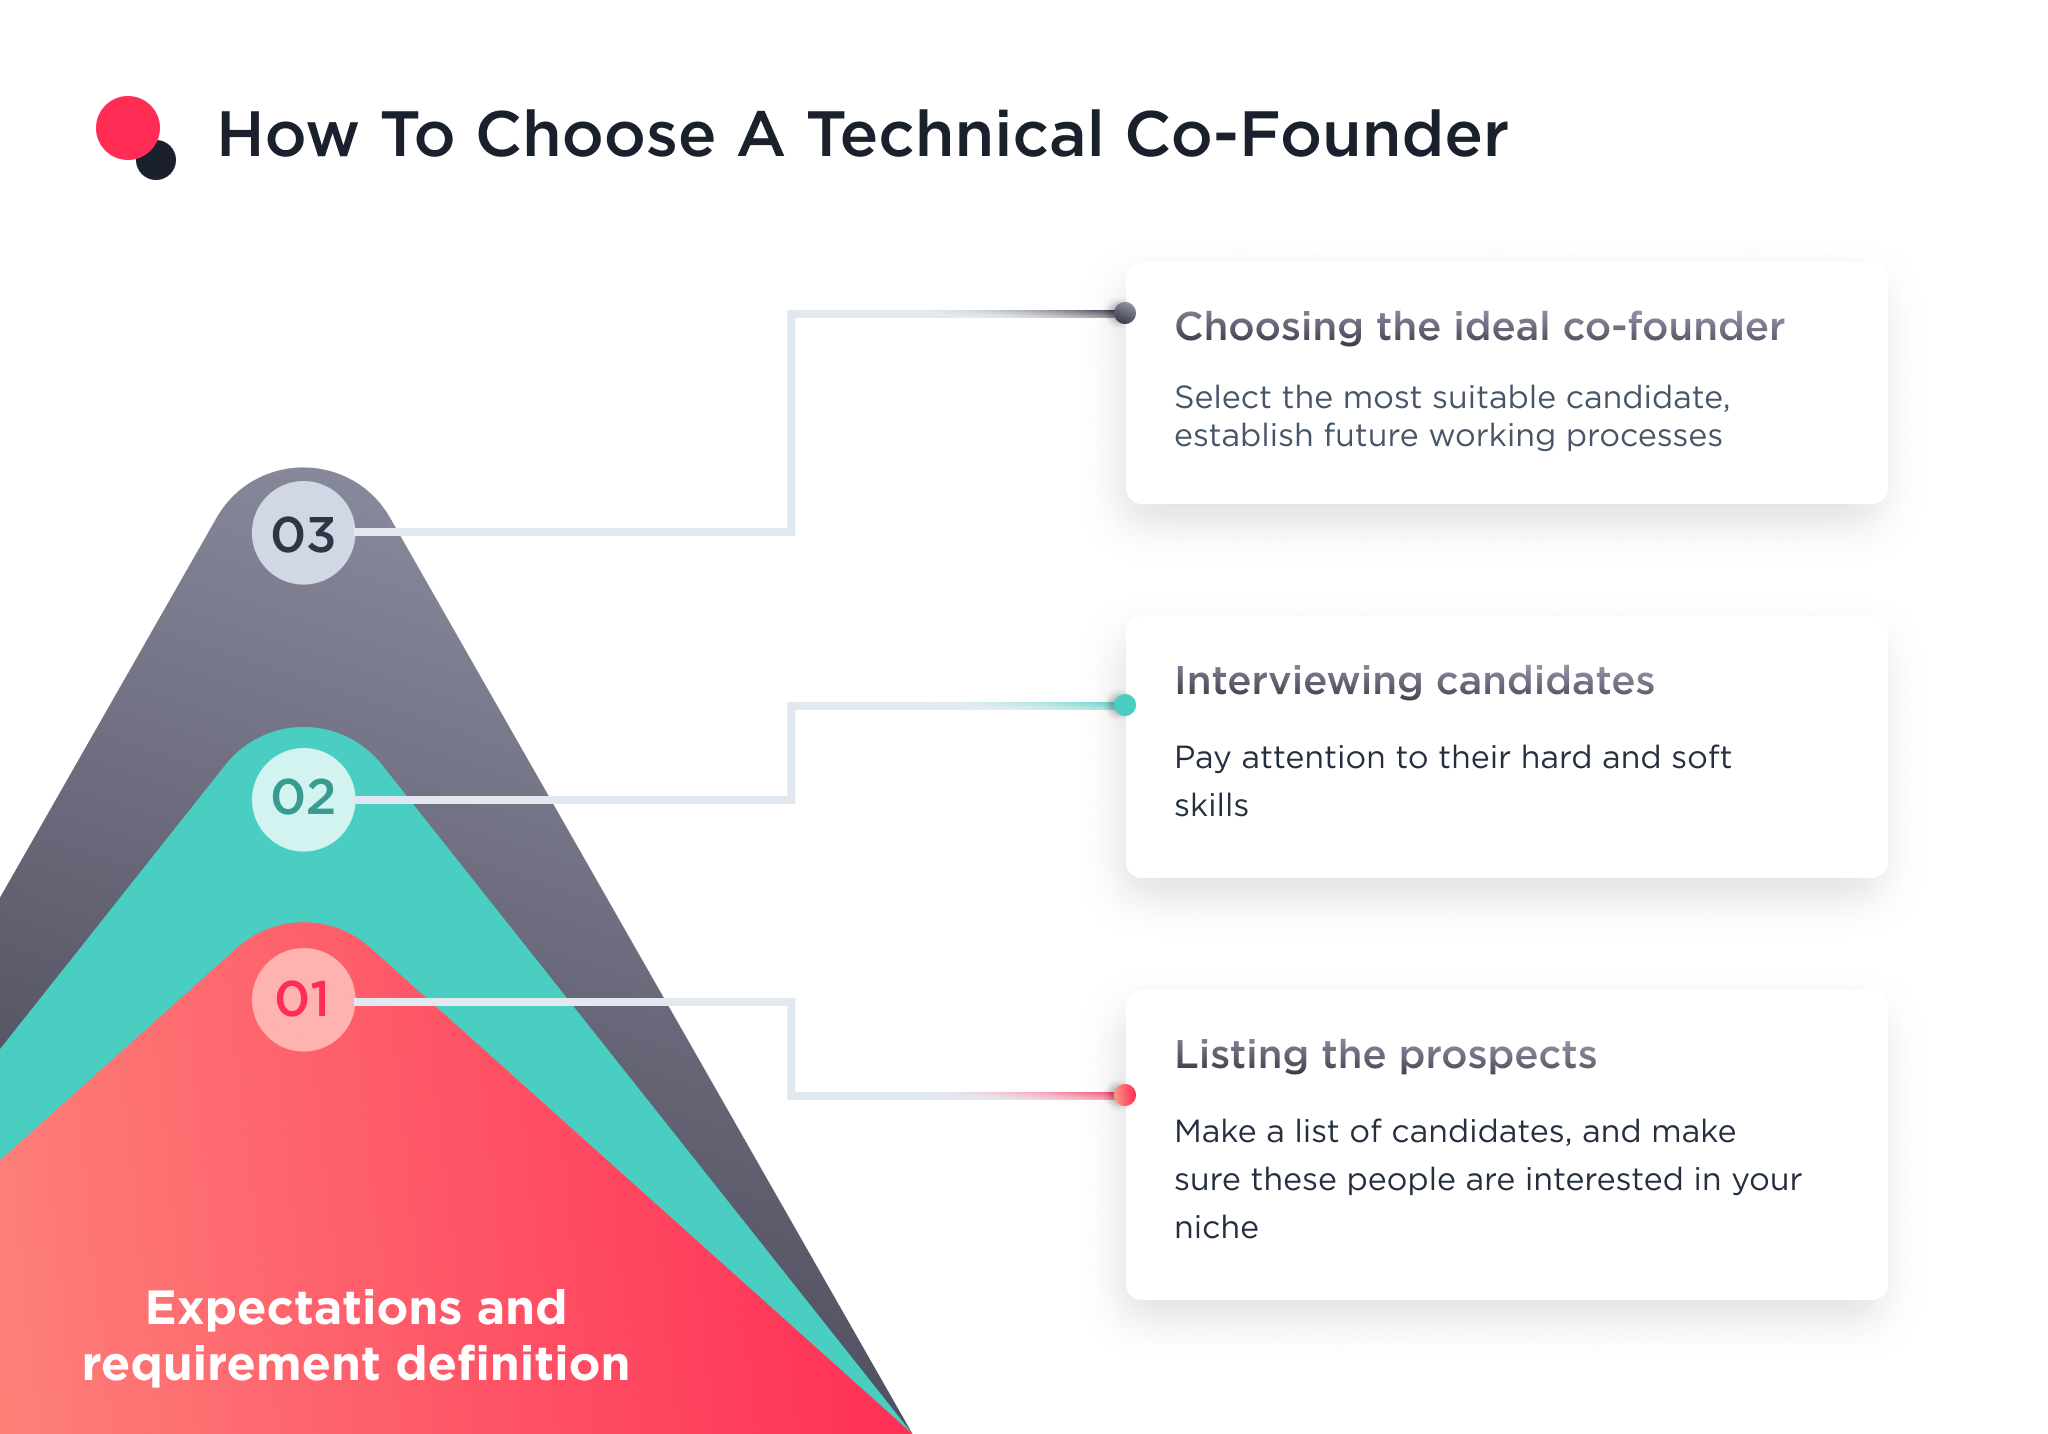 The picture describes every step of finding a tech co-founder